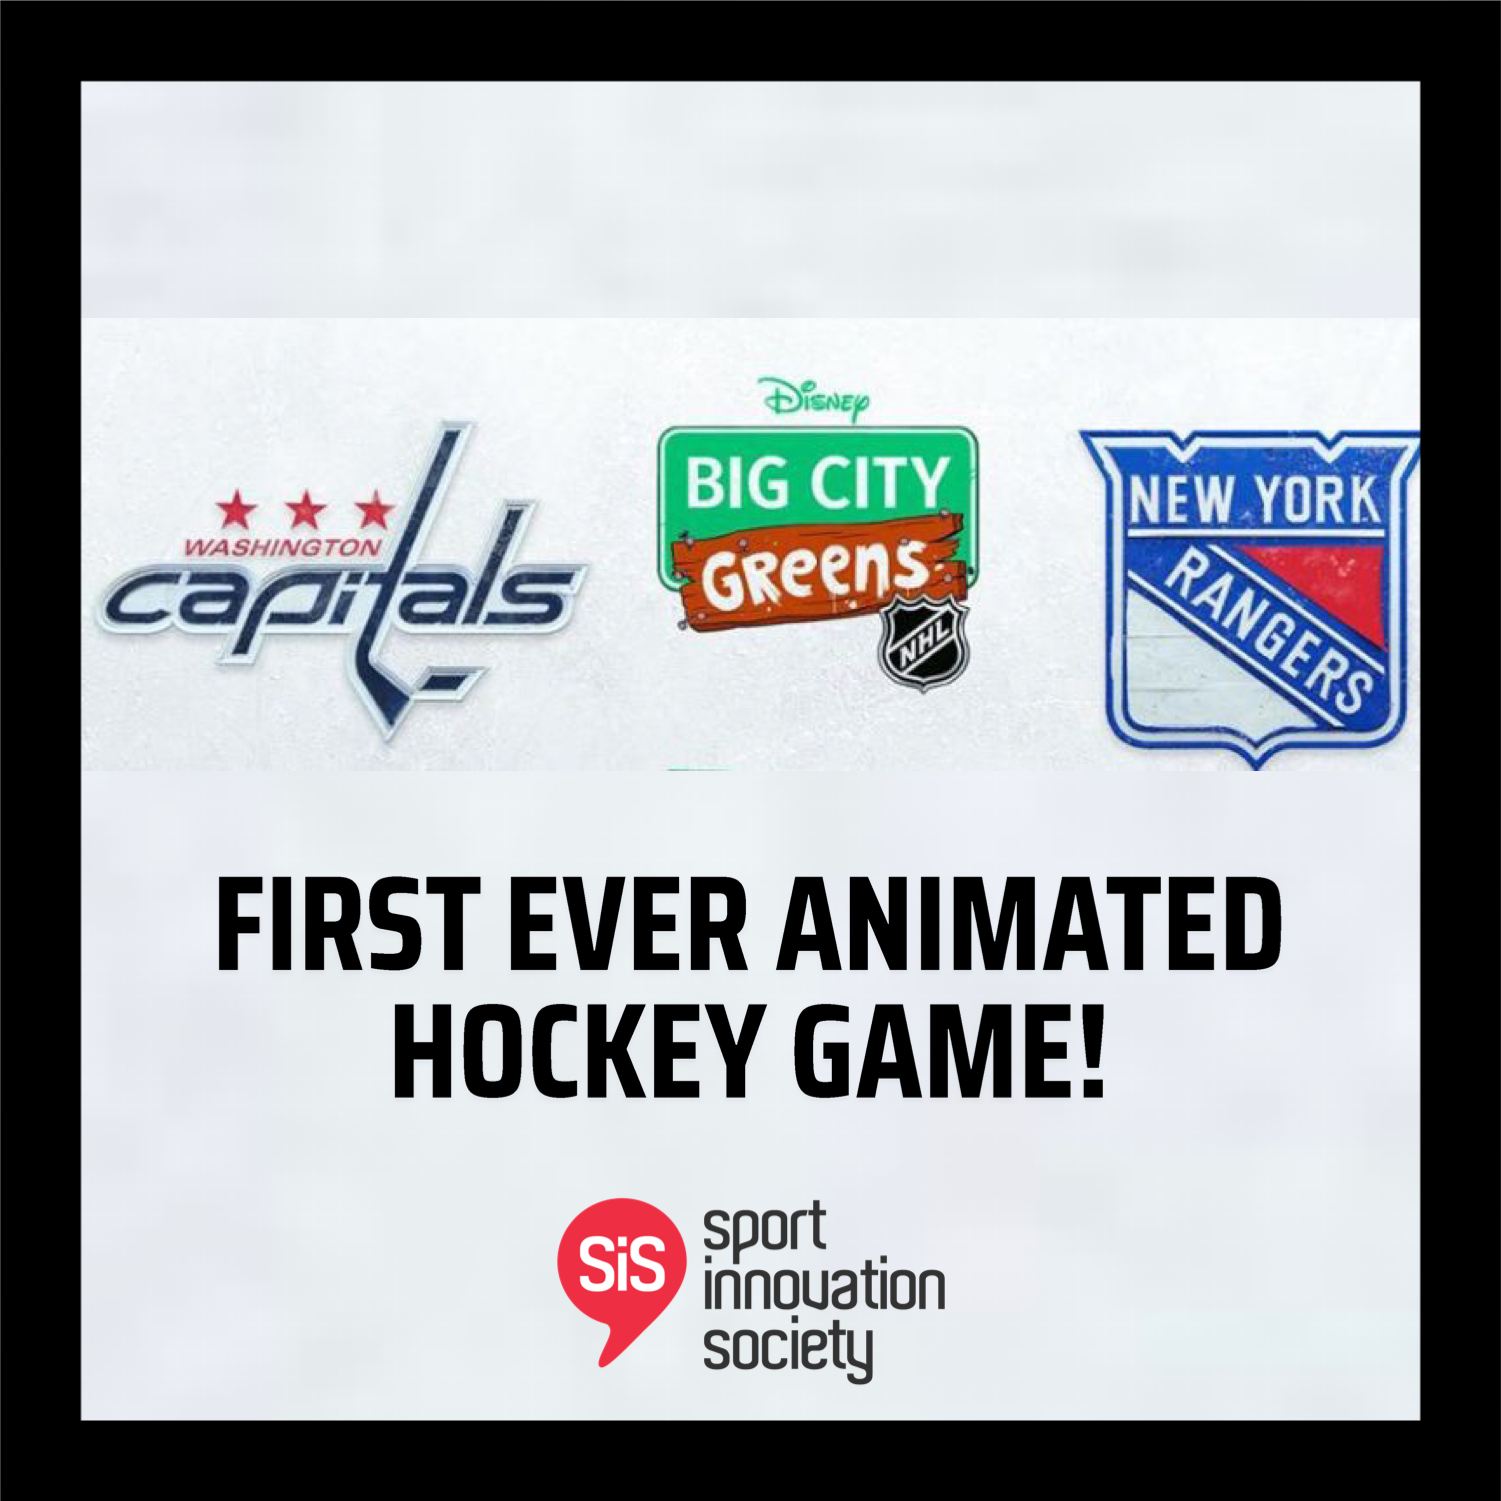 NHL and Big City Greens Team Up for FirstEver Animated Hockey Game! SiS